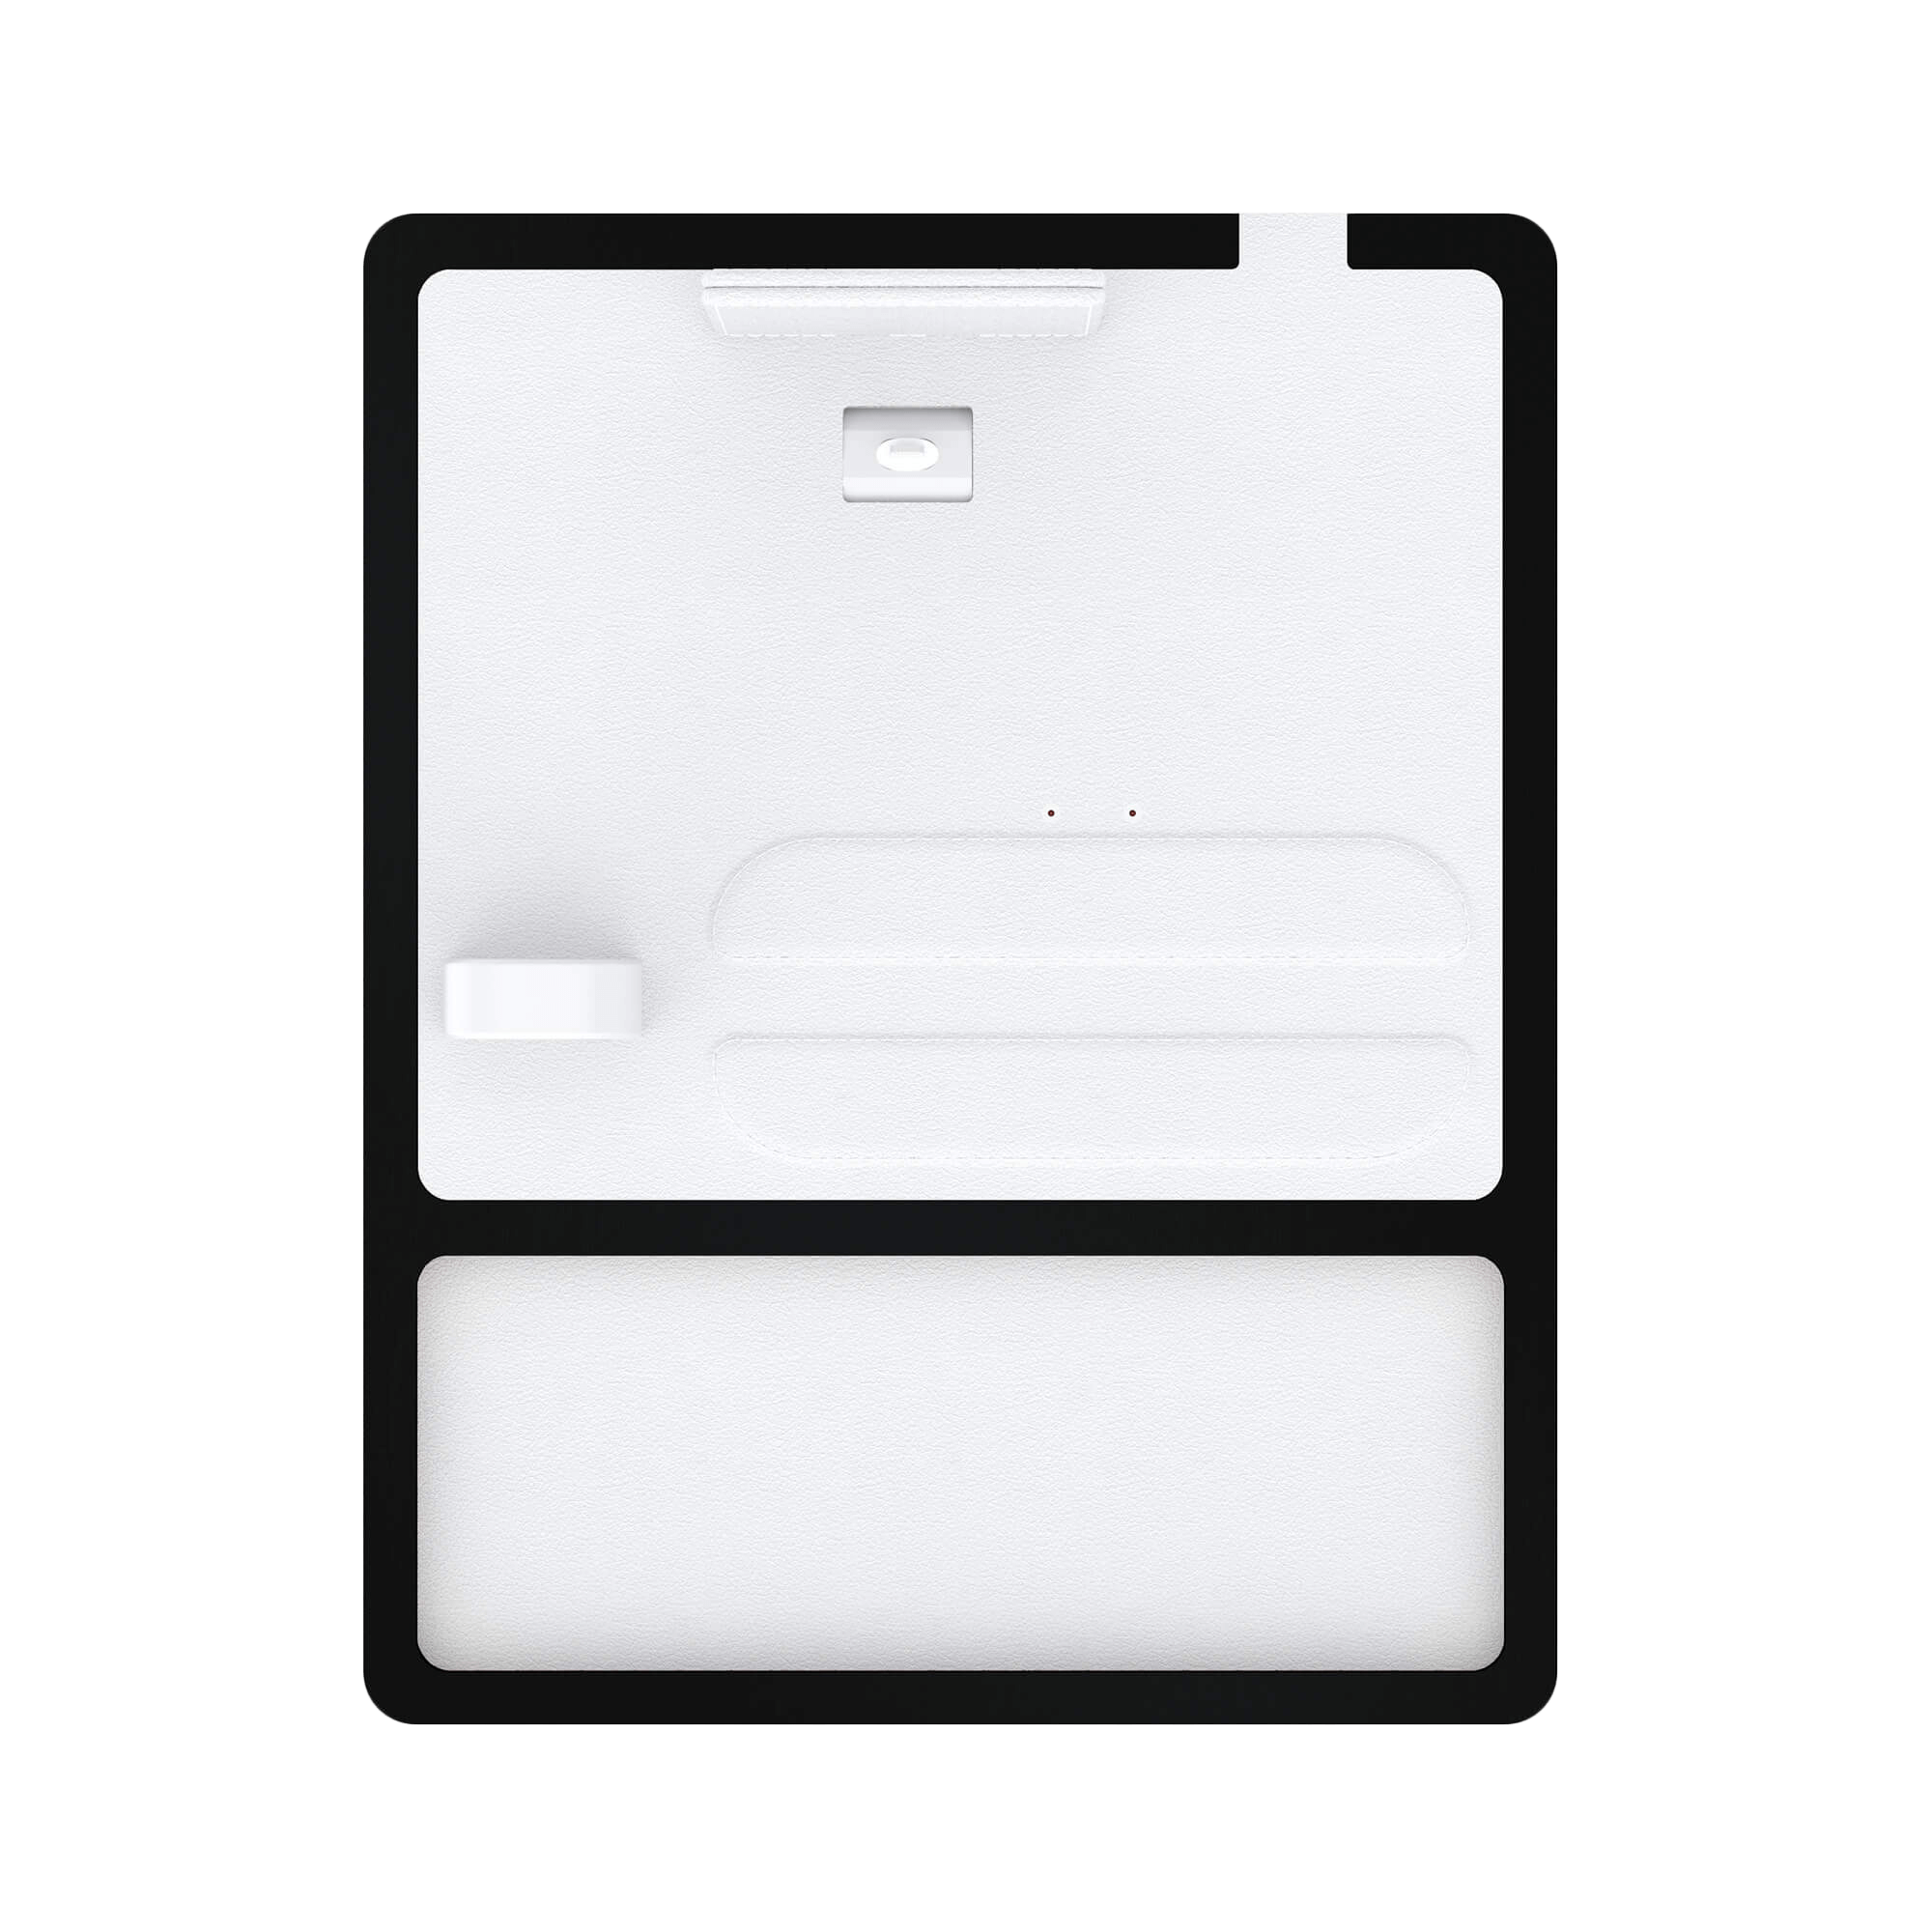 NYTSTND QUAD TRAY white top Midnight Black base, front view without devices